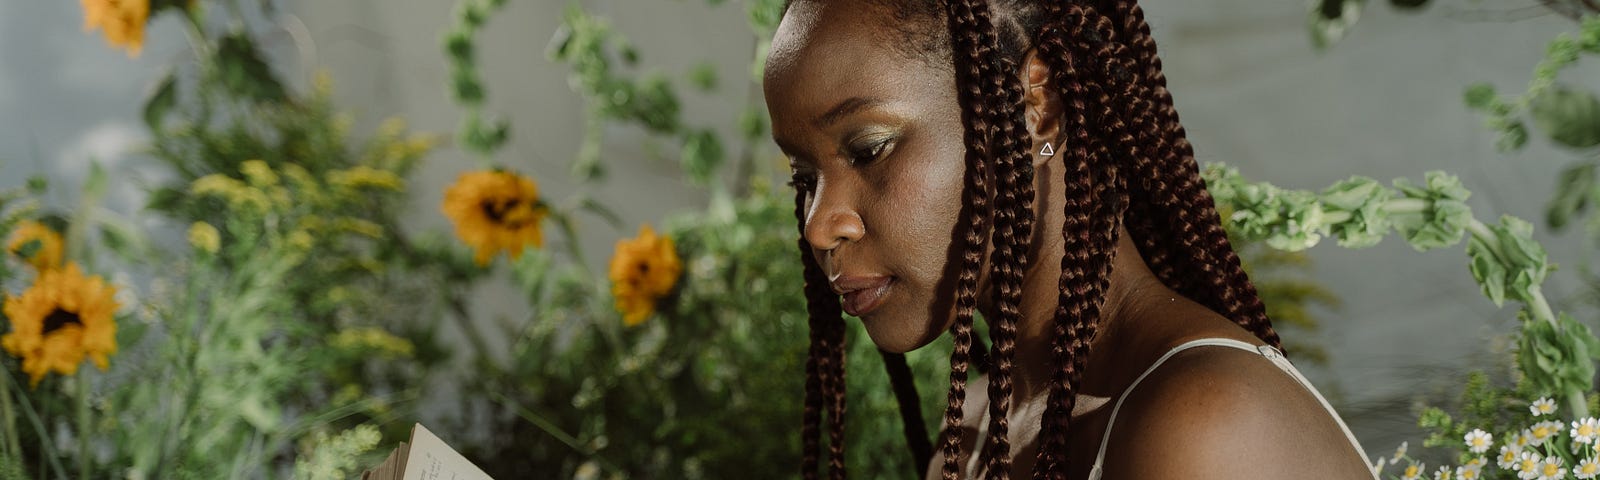 A Black woman with box braids reads a book, behind her are yellow flowers.